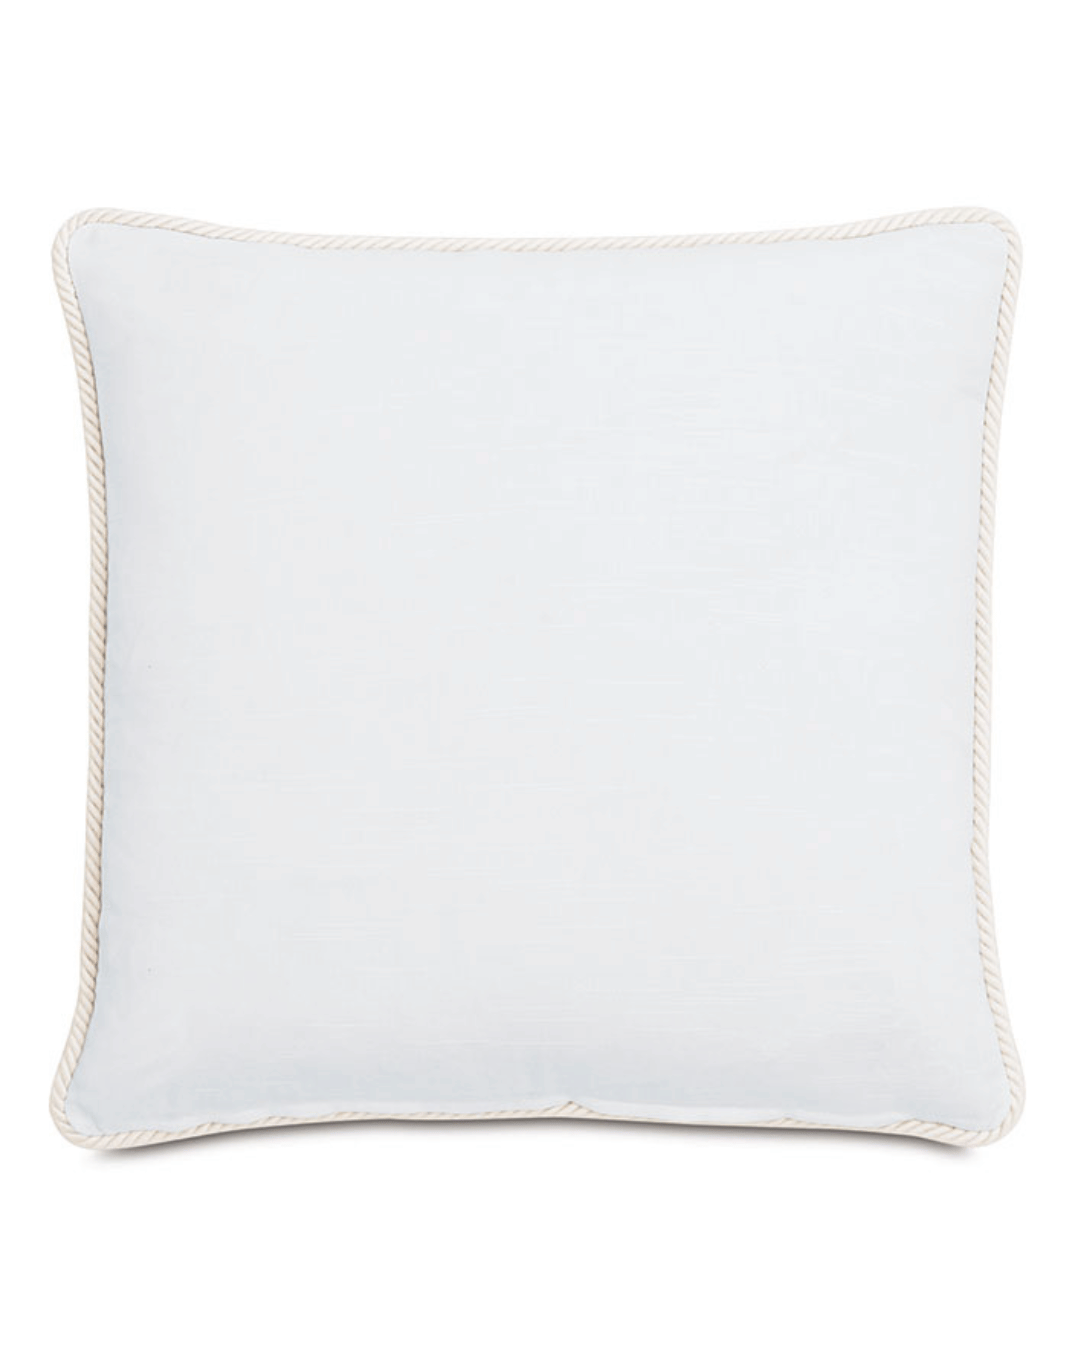 White Casa Chenille Pillow by Eastern Accents with a beige piped border isolated on a white background, perfect for a bungalow in Scottsdale, Arizona.